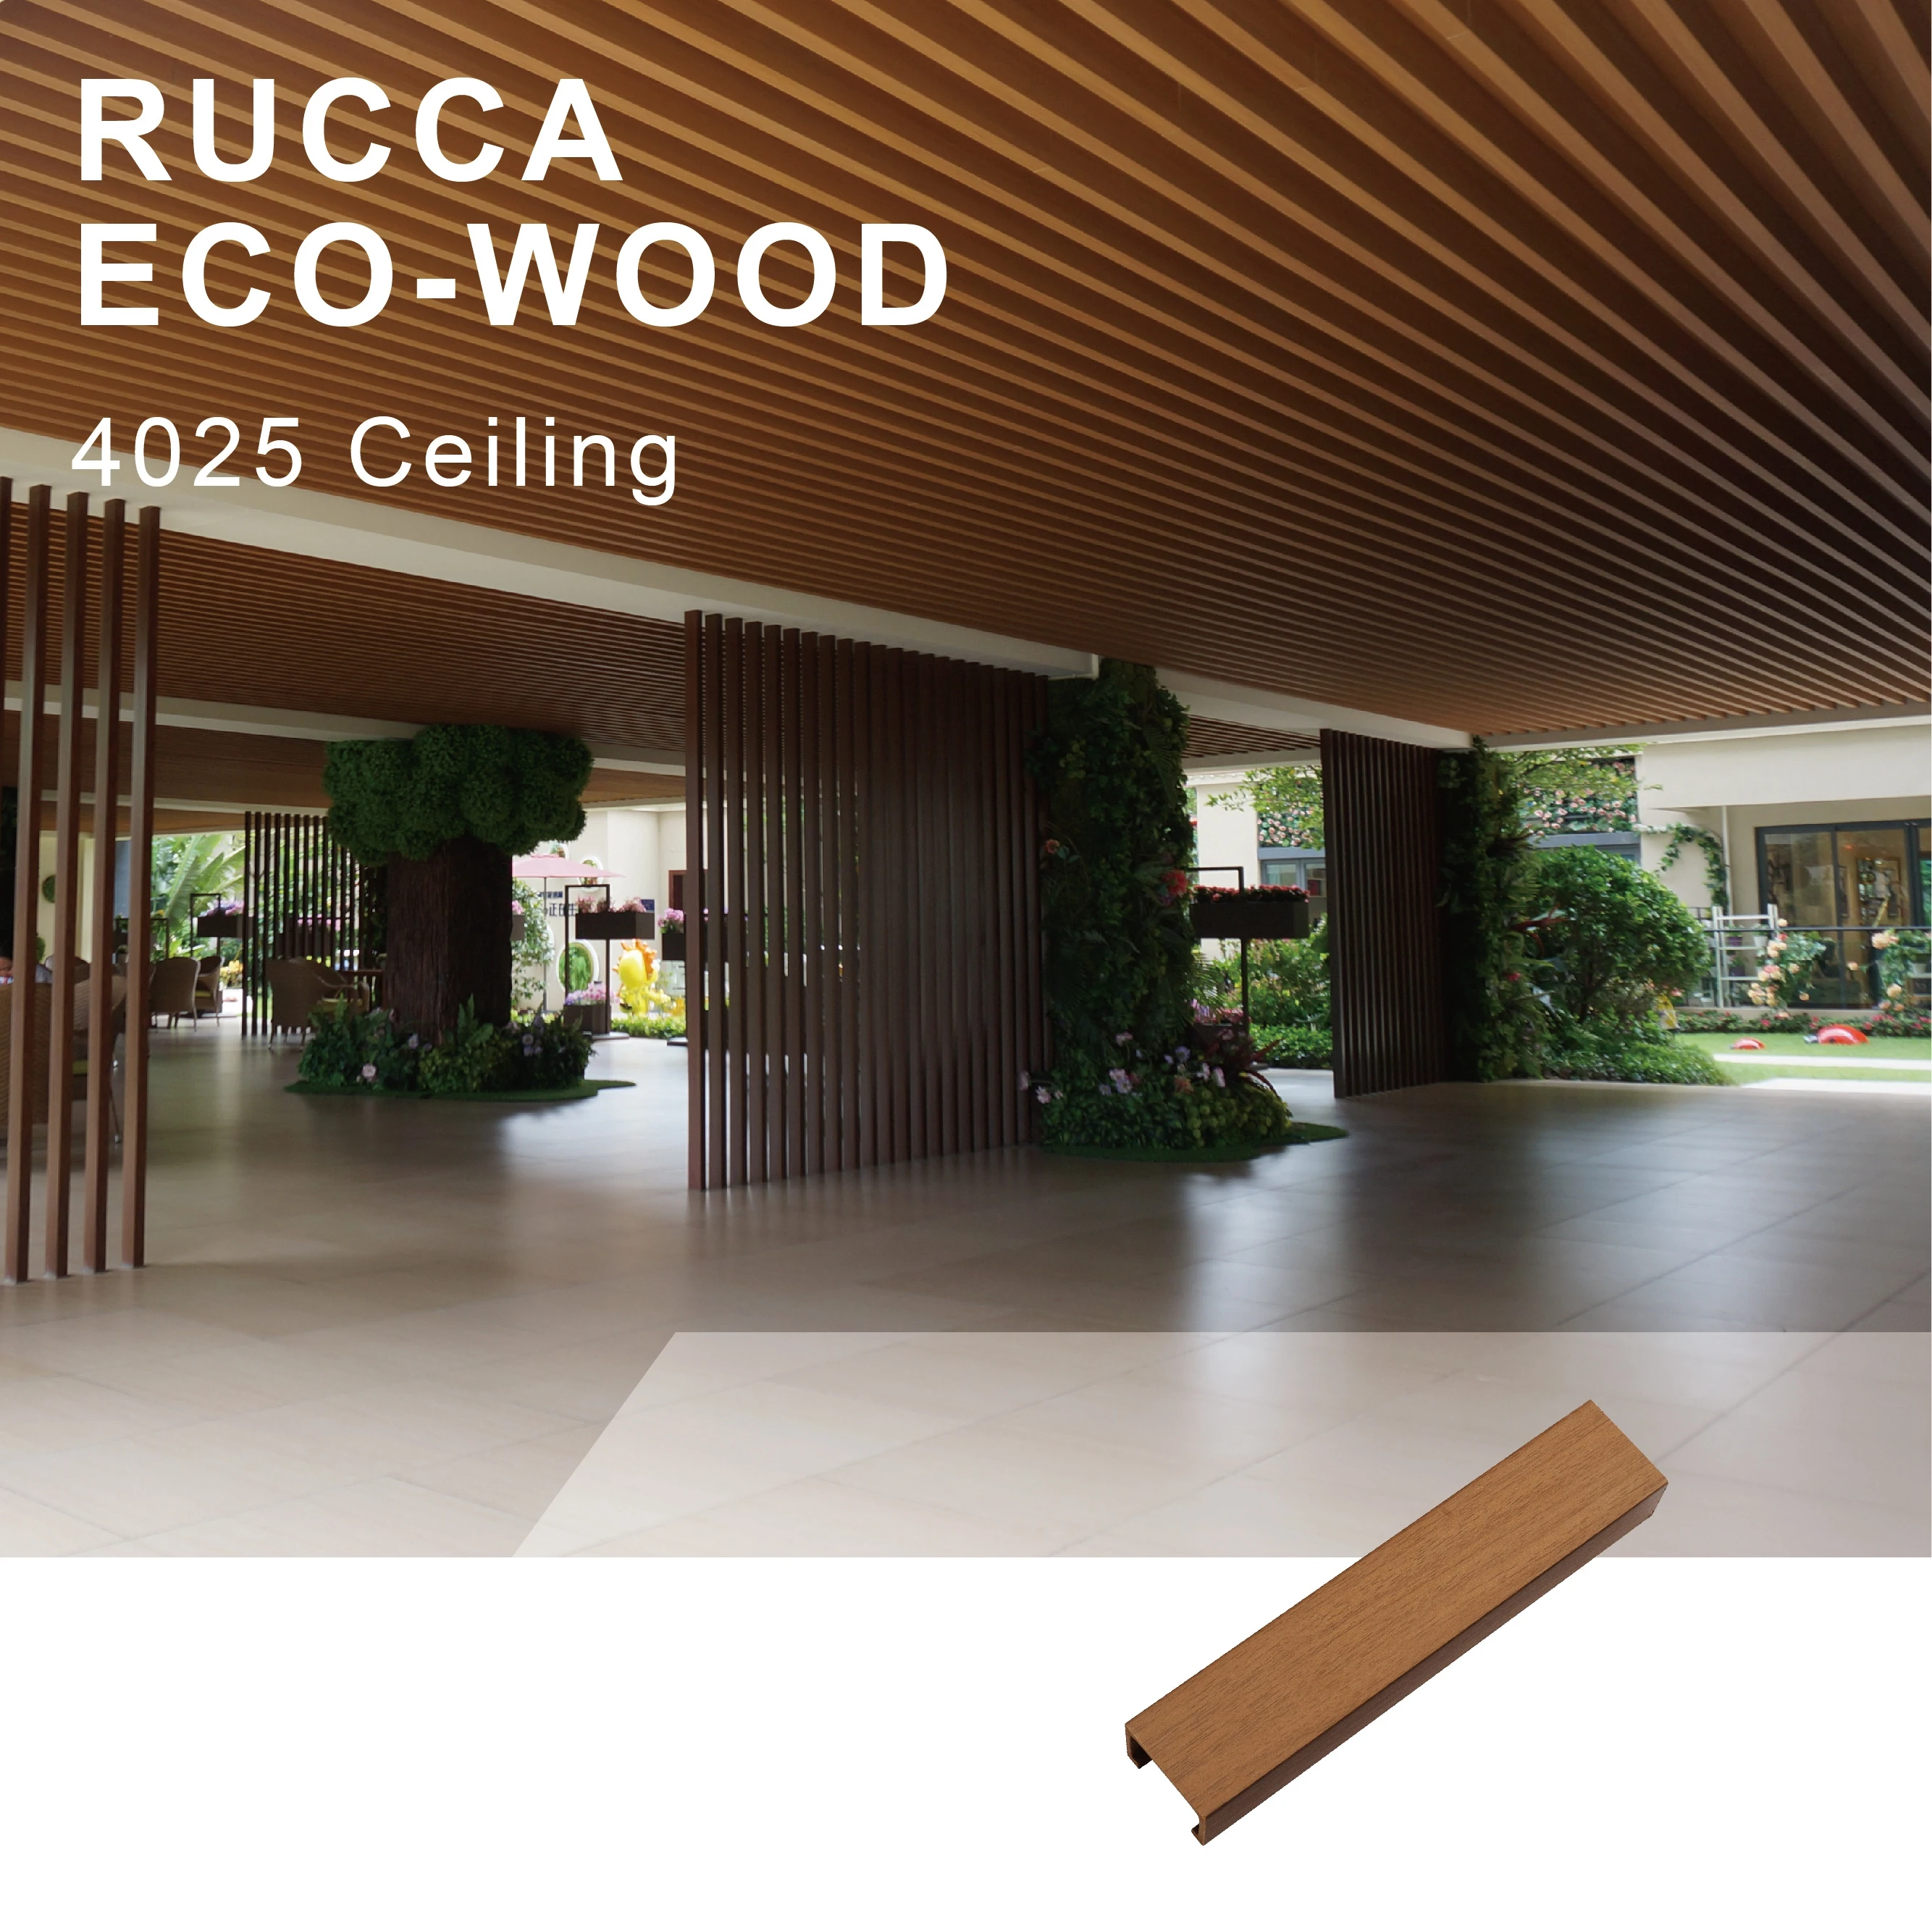 Rucca Wpc Decorative Wood Plastic Composite Interior Wood Strip Pvc Ceiling Panels With Factory Low Price 40 25mm Buy Ceiling Panels Decorative